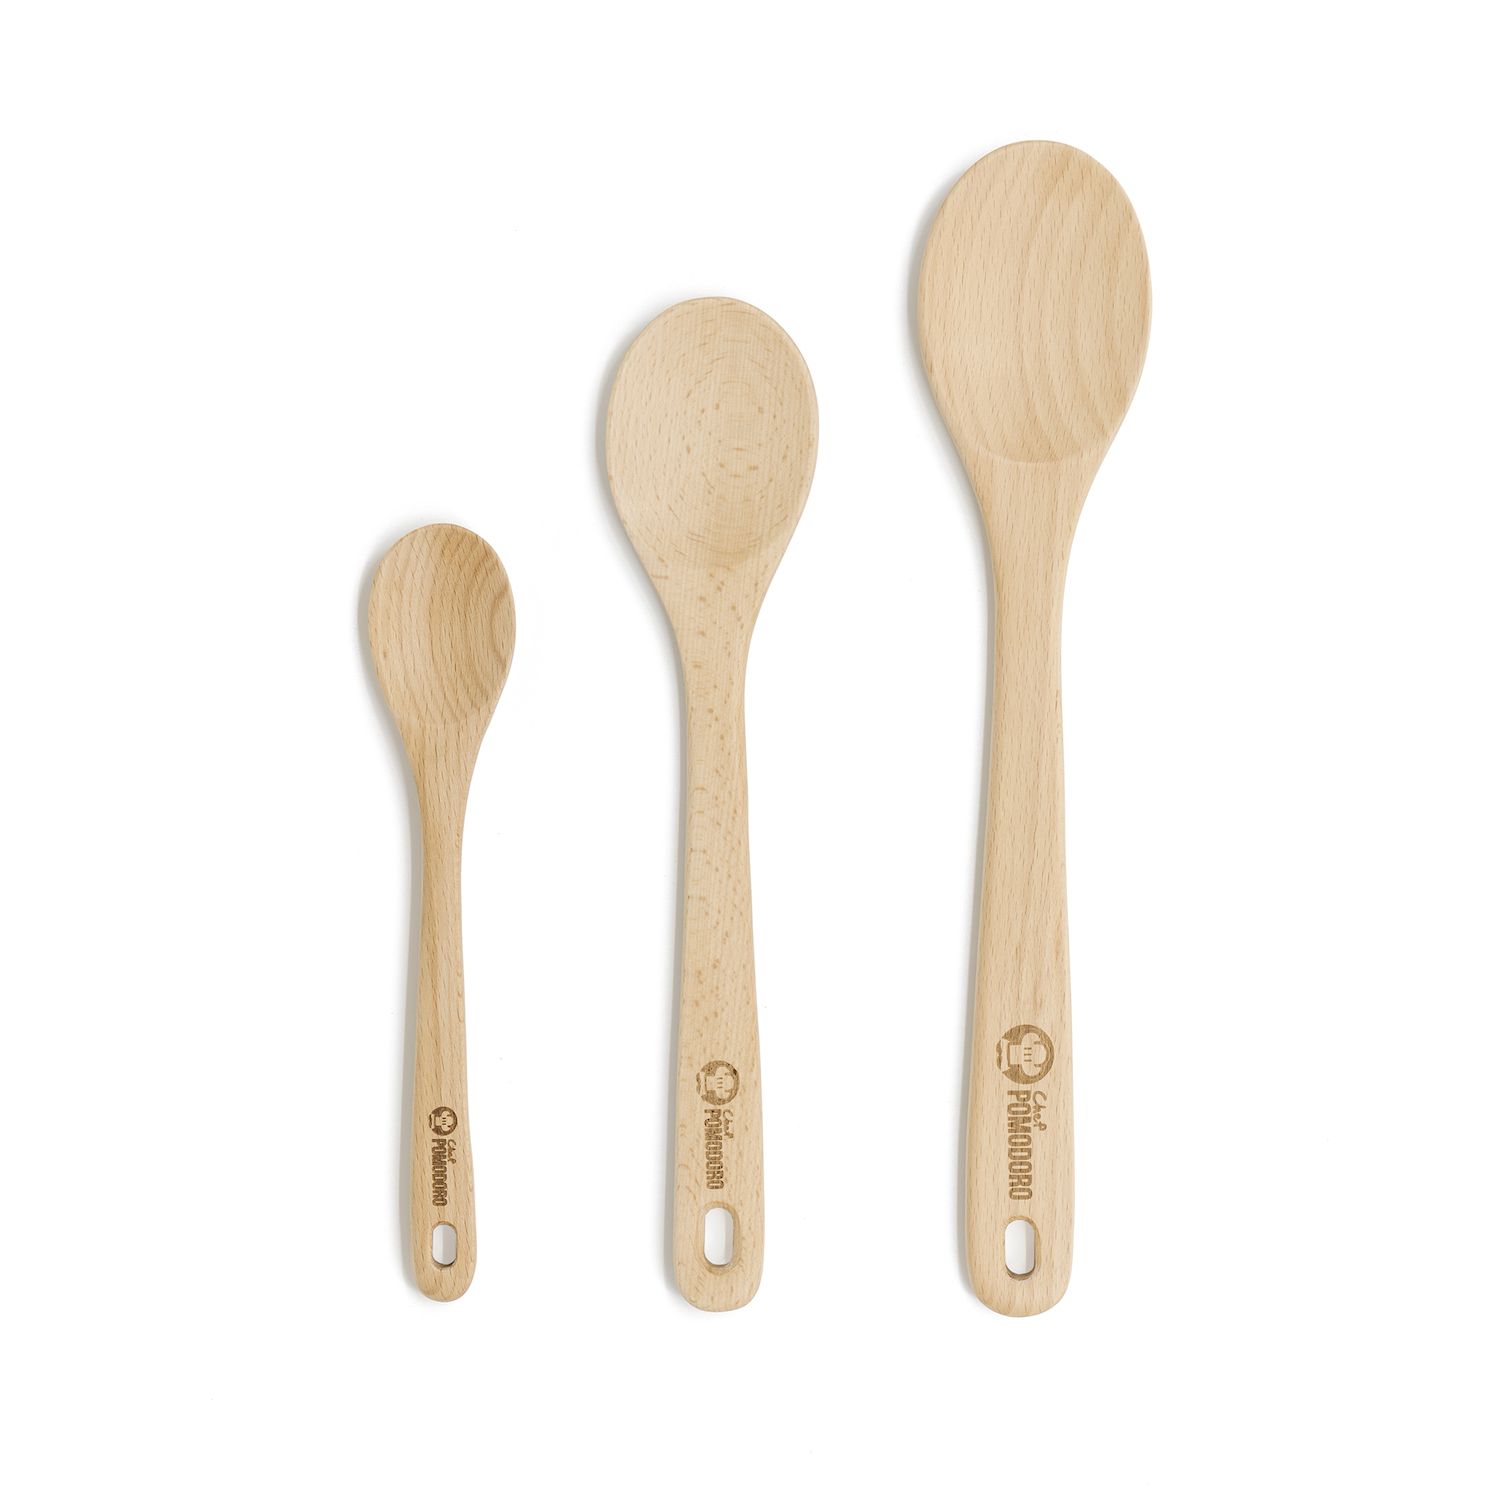 Farmlyn Creek Set Of 3 Wooden Serving Spoons For Salad, Cooking